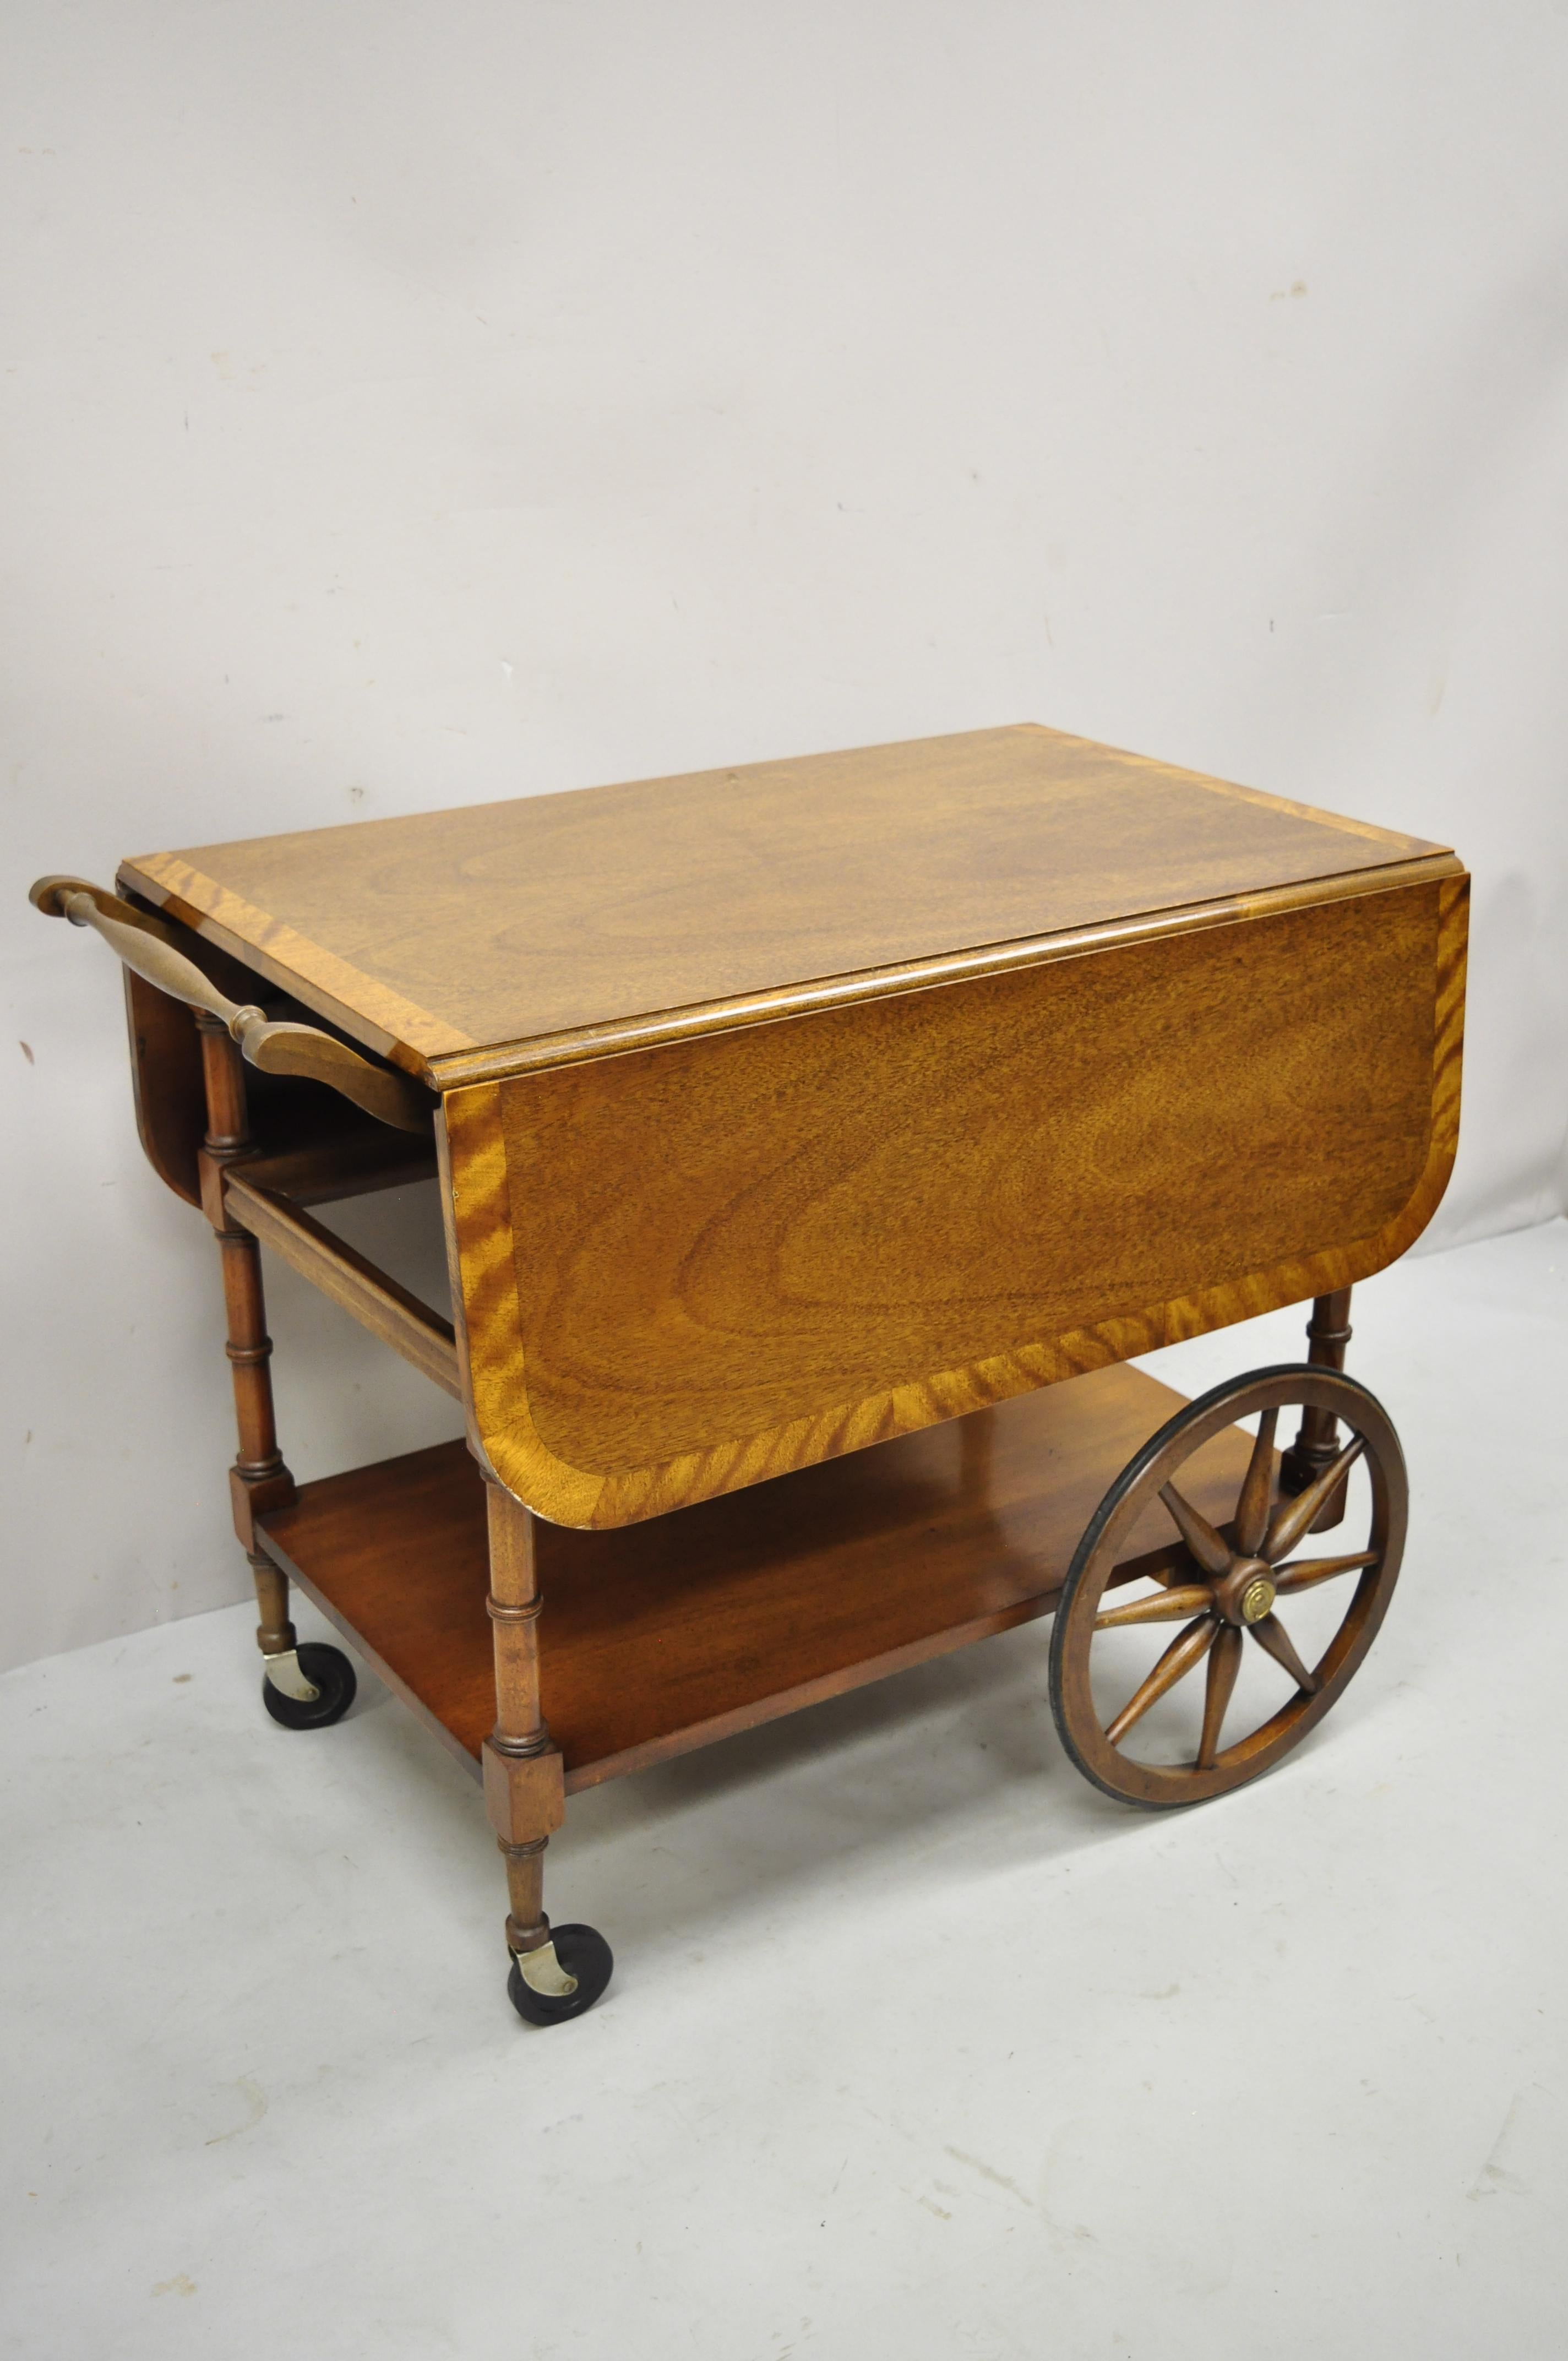 Baker drop leaf mahoganybanded inlay tea cart server cart with pull out glass tray. Item features satinwood banded inlay top, lower removable glass shelf, beautiful wood grain, original label, 1 dovetailed drawer, very nice vintage item, quality